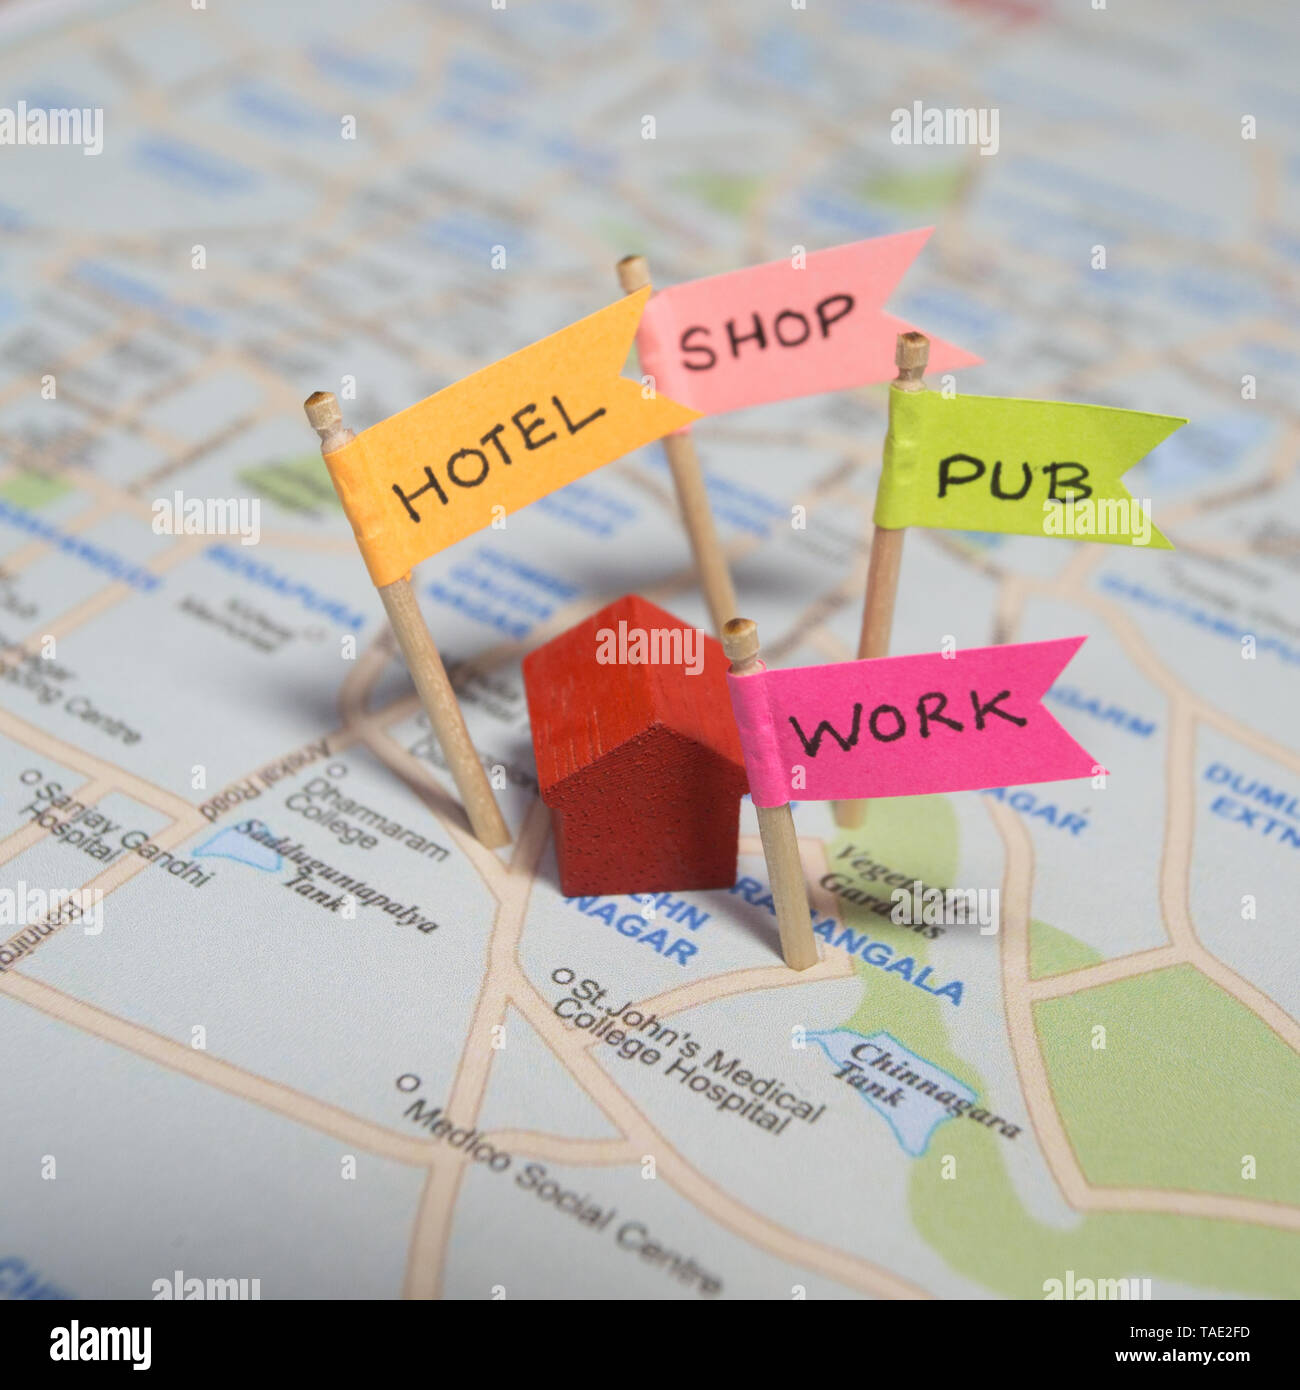 A small miniature house on a map with pins for work, hotel, shop and pub Stock Photo